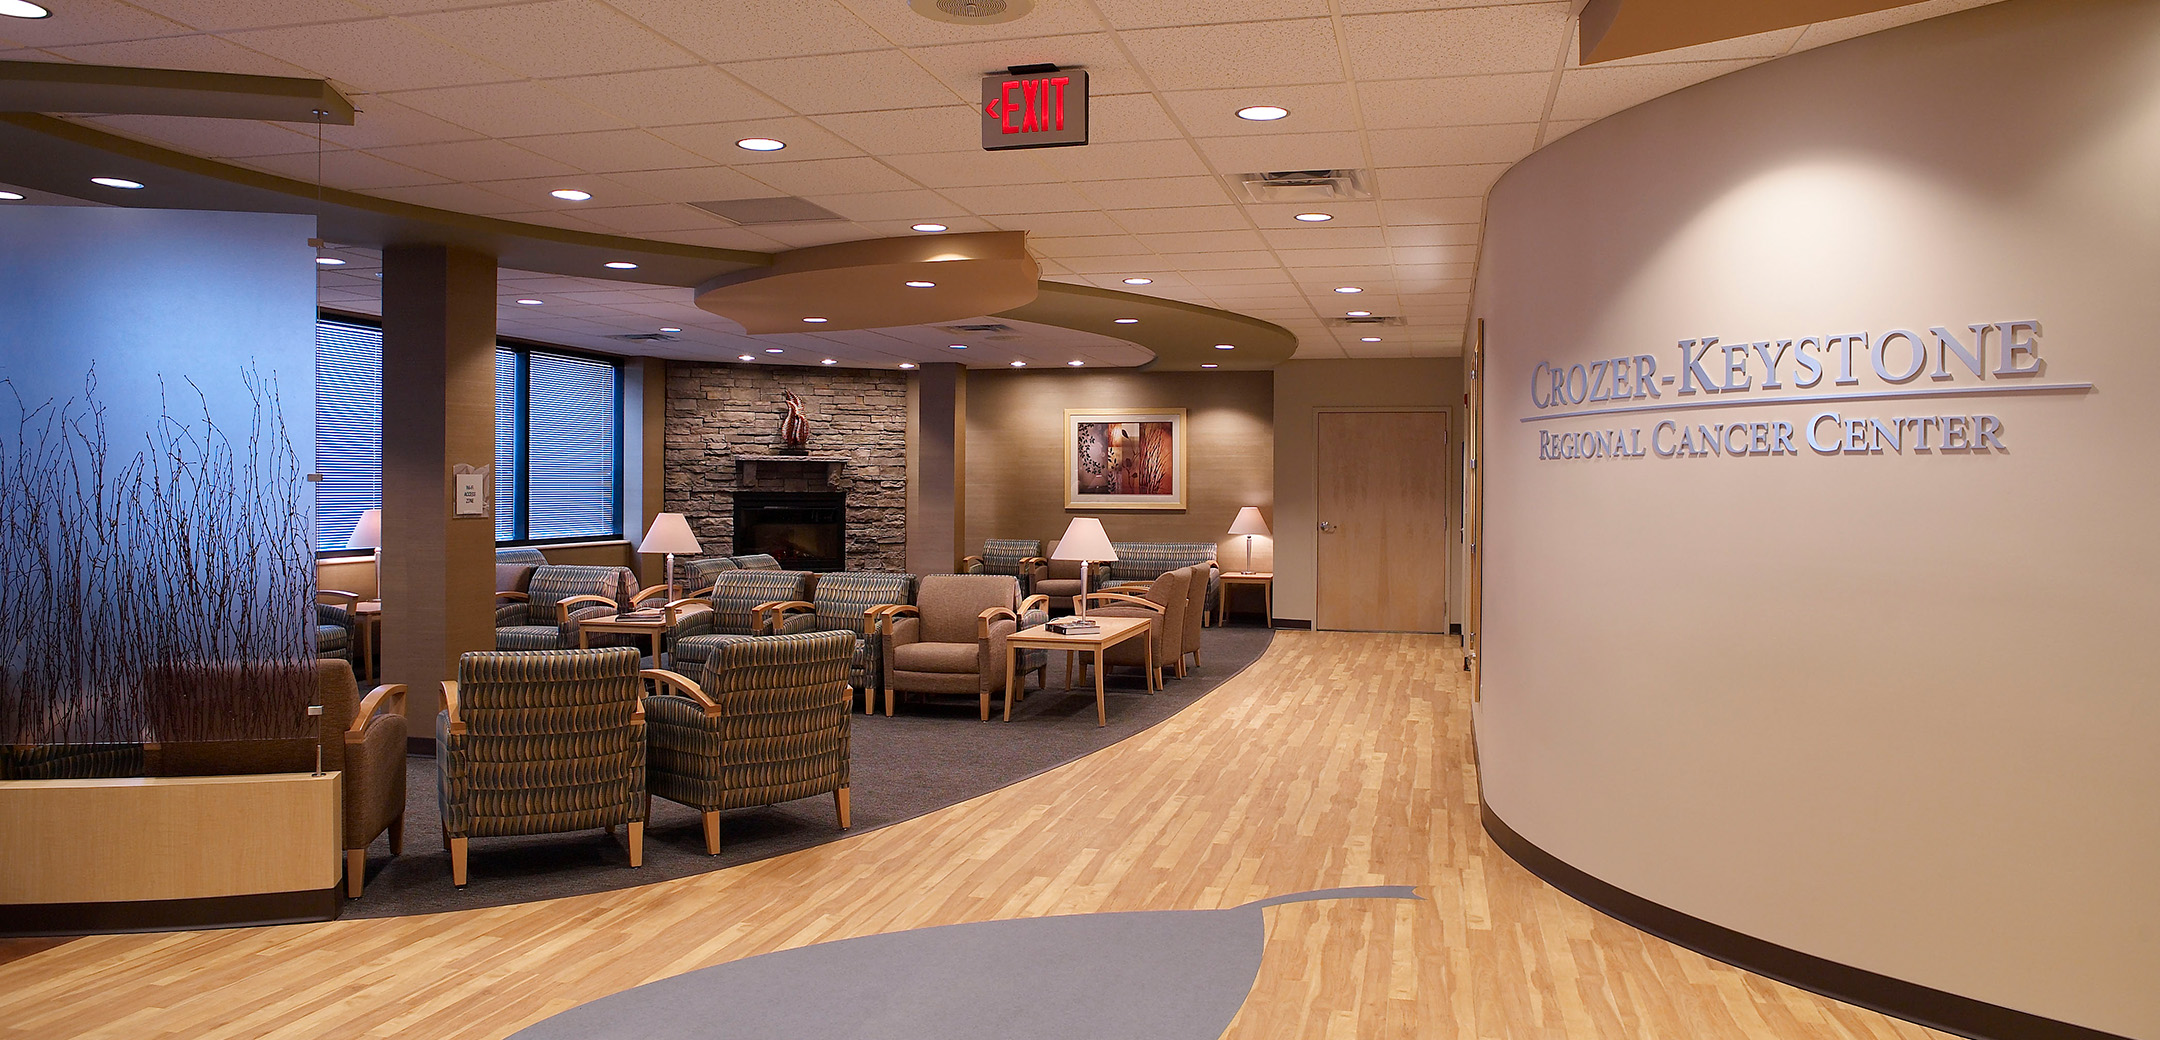 The interior view of the Crozer Keystone building showcasing the patient seating area in the main lobby.